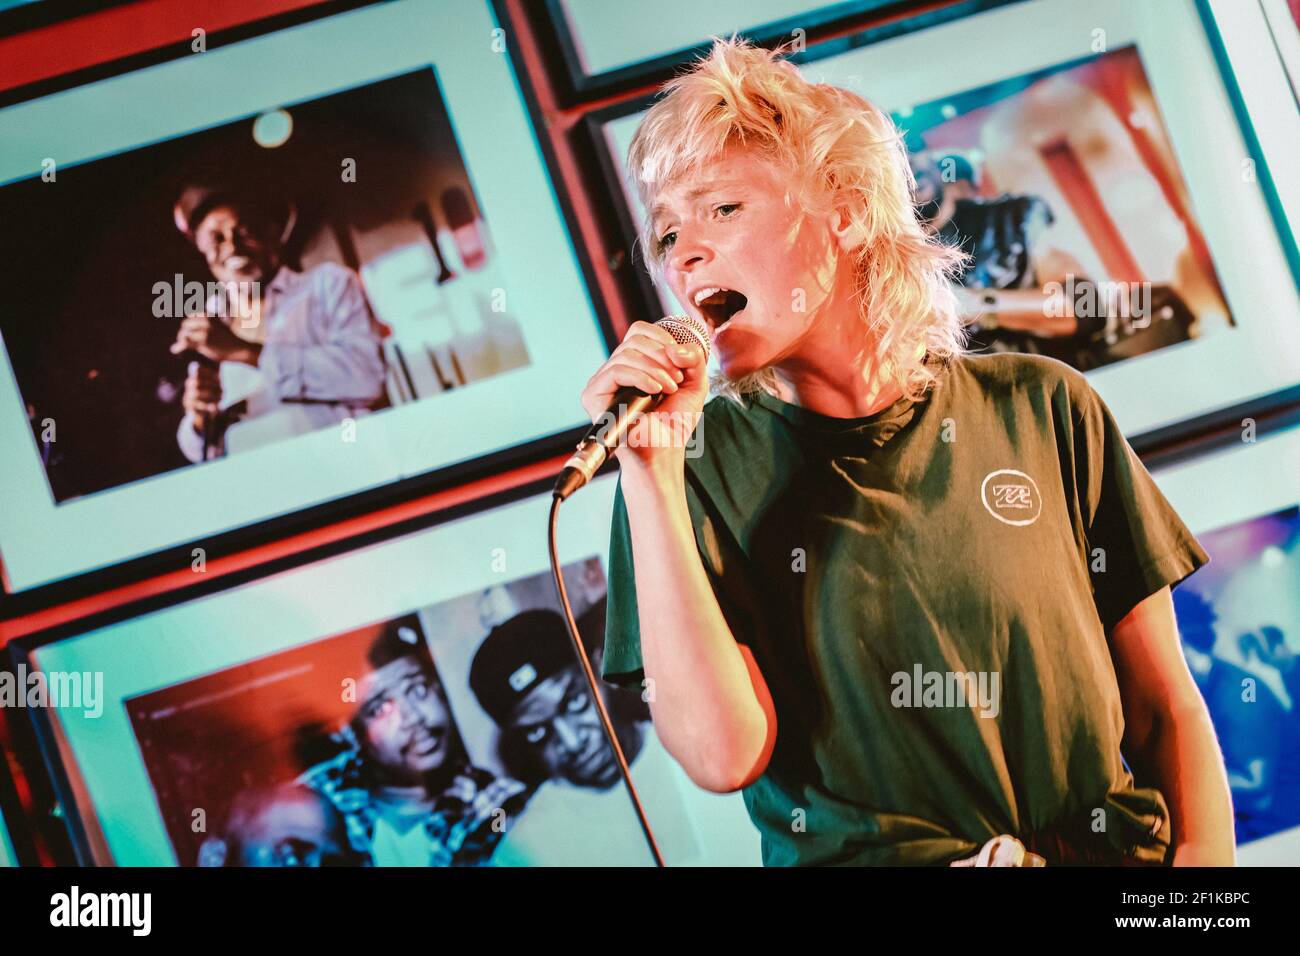 London, UK, 12.09.20 - Jason Williamson of Sleaford Mods performs with  onstage at London's 100 Club in a live streamed performance. Stock Photo